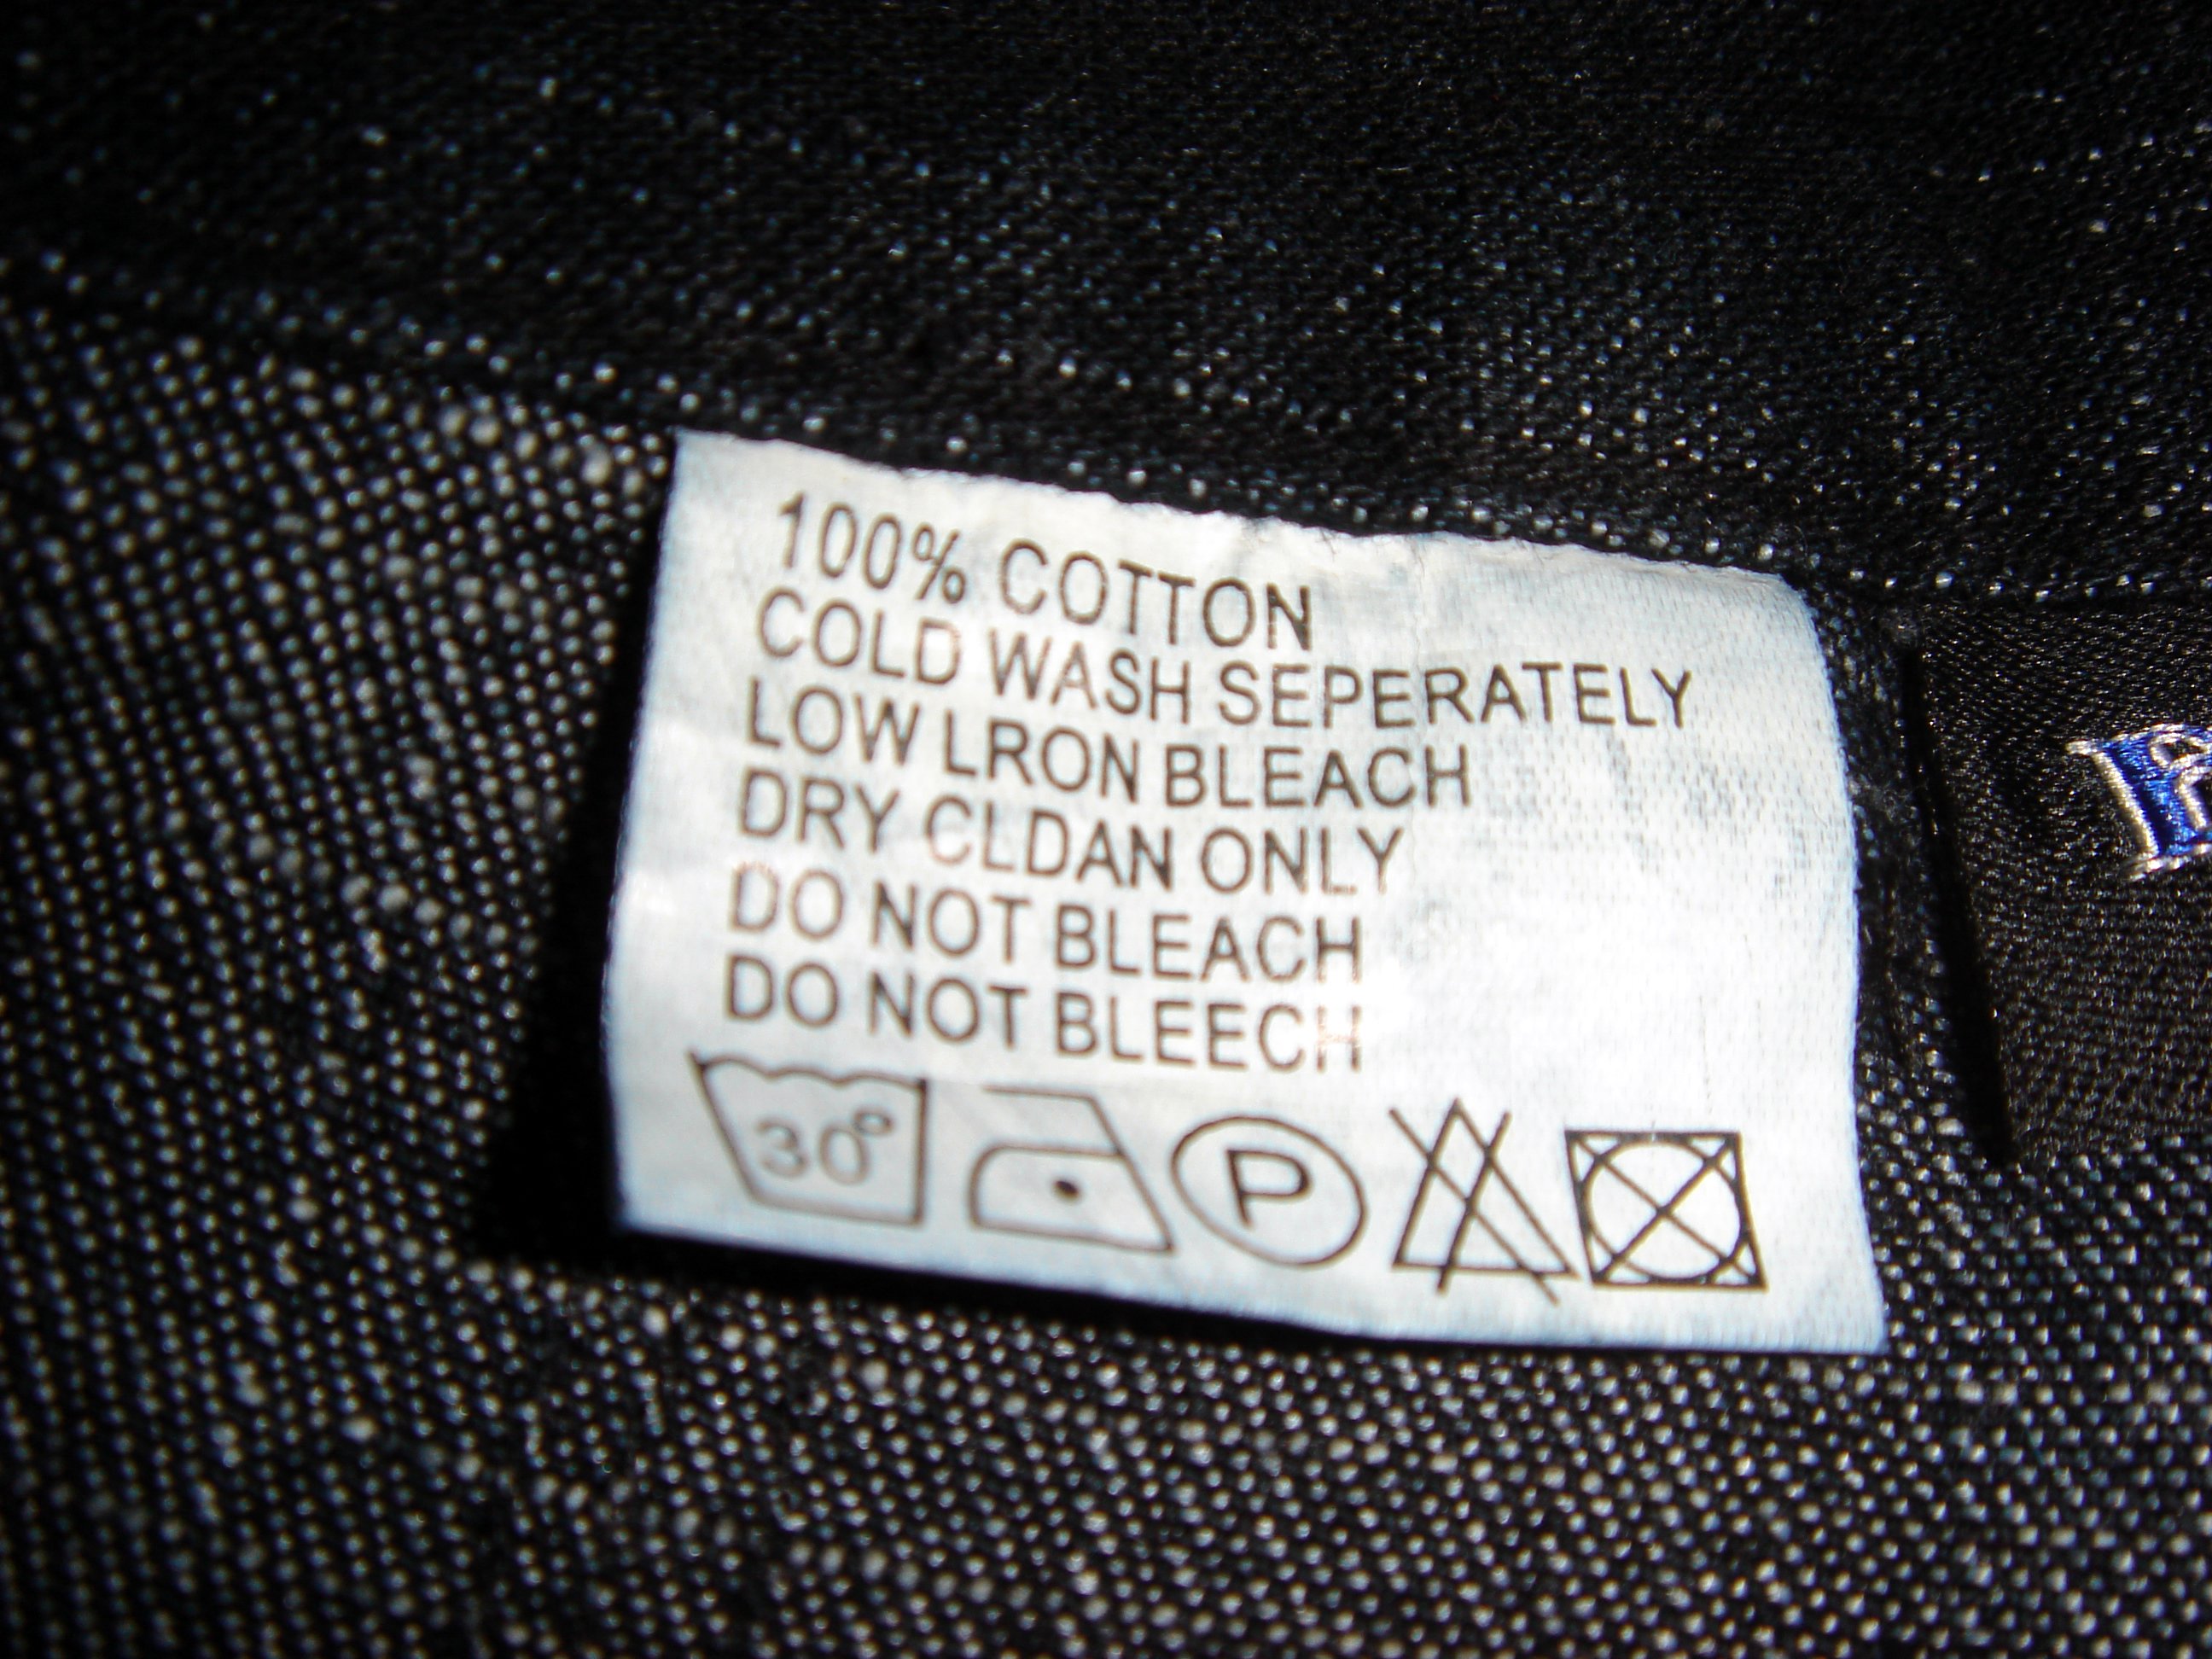 How to Wash Dry Clean Only Clothes